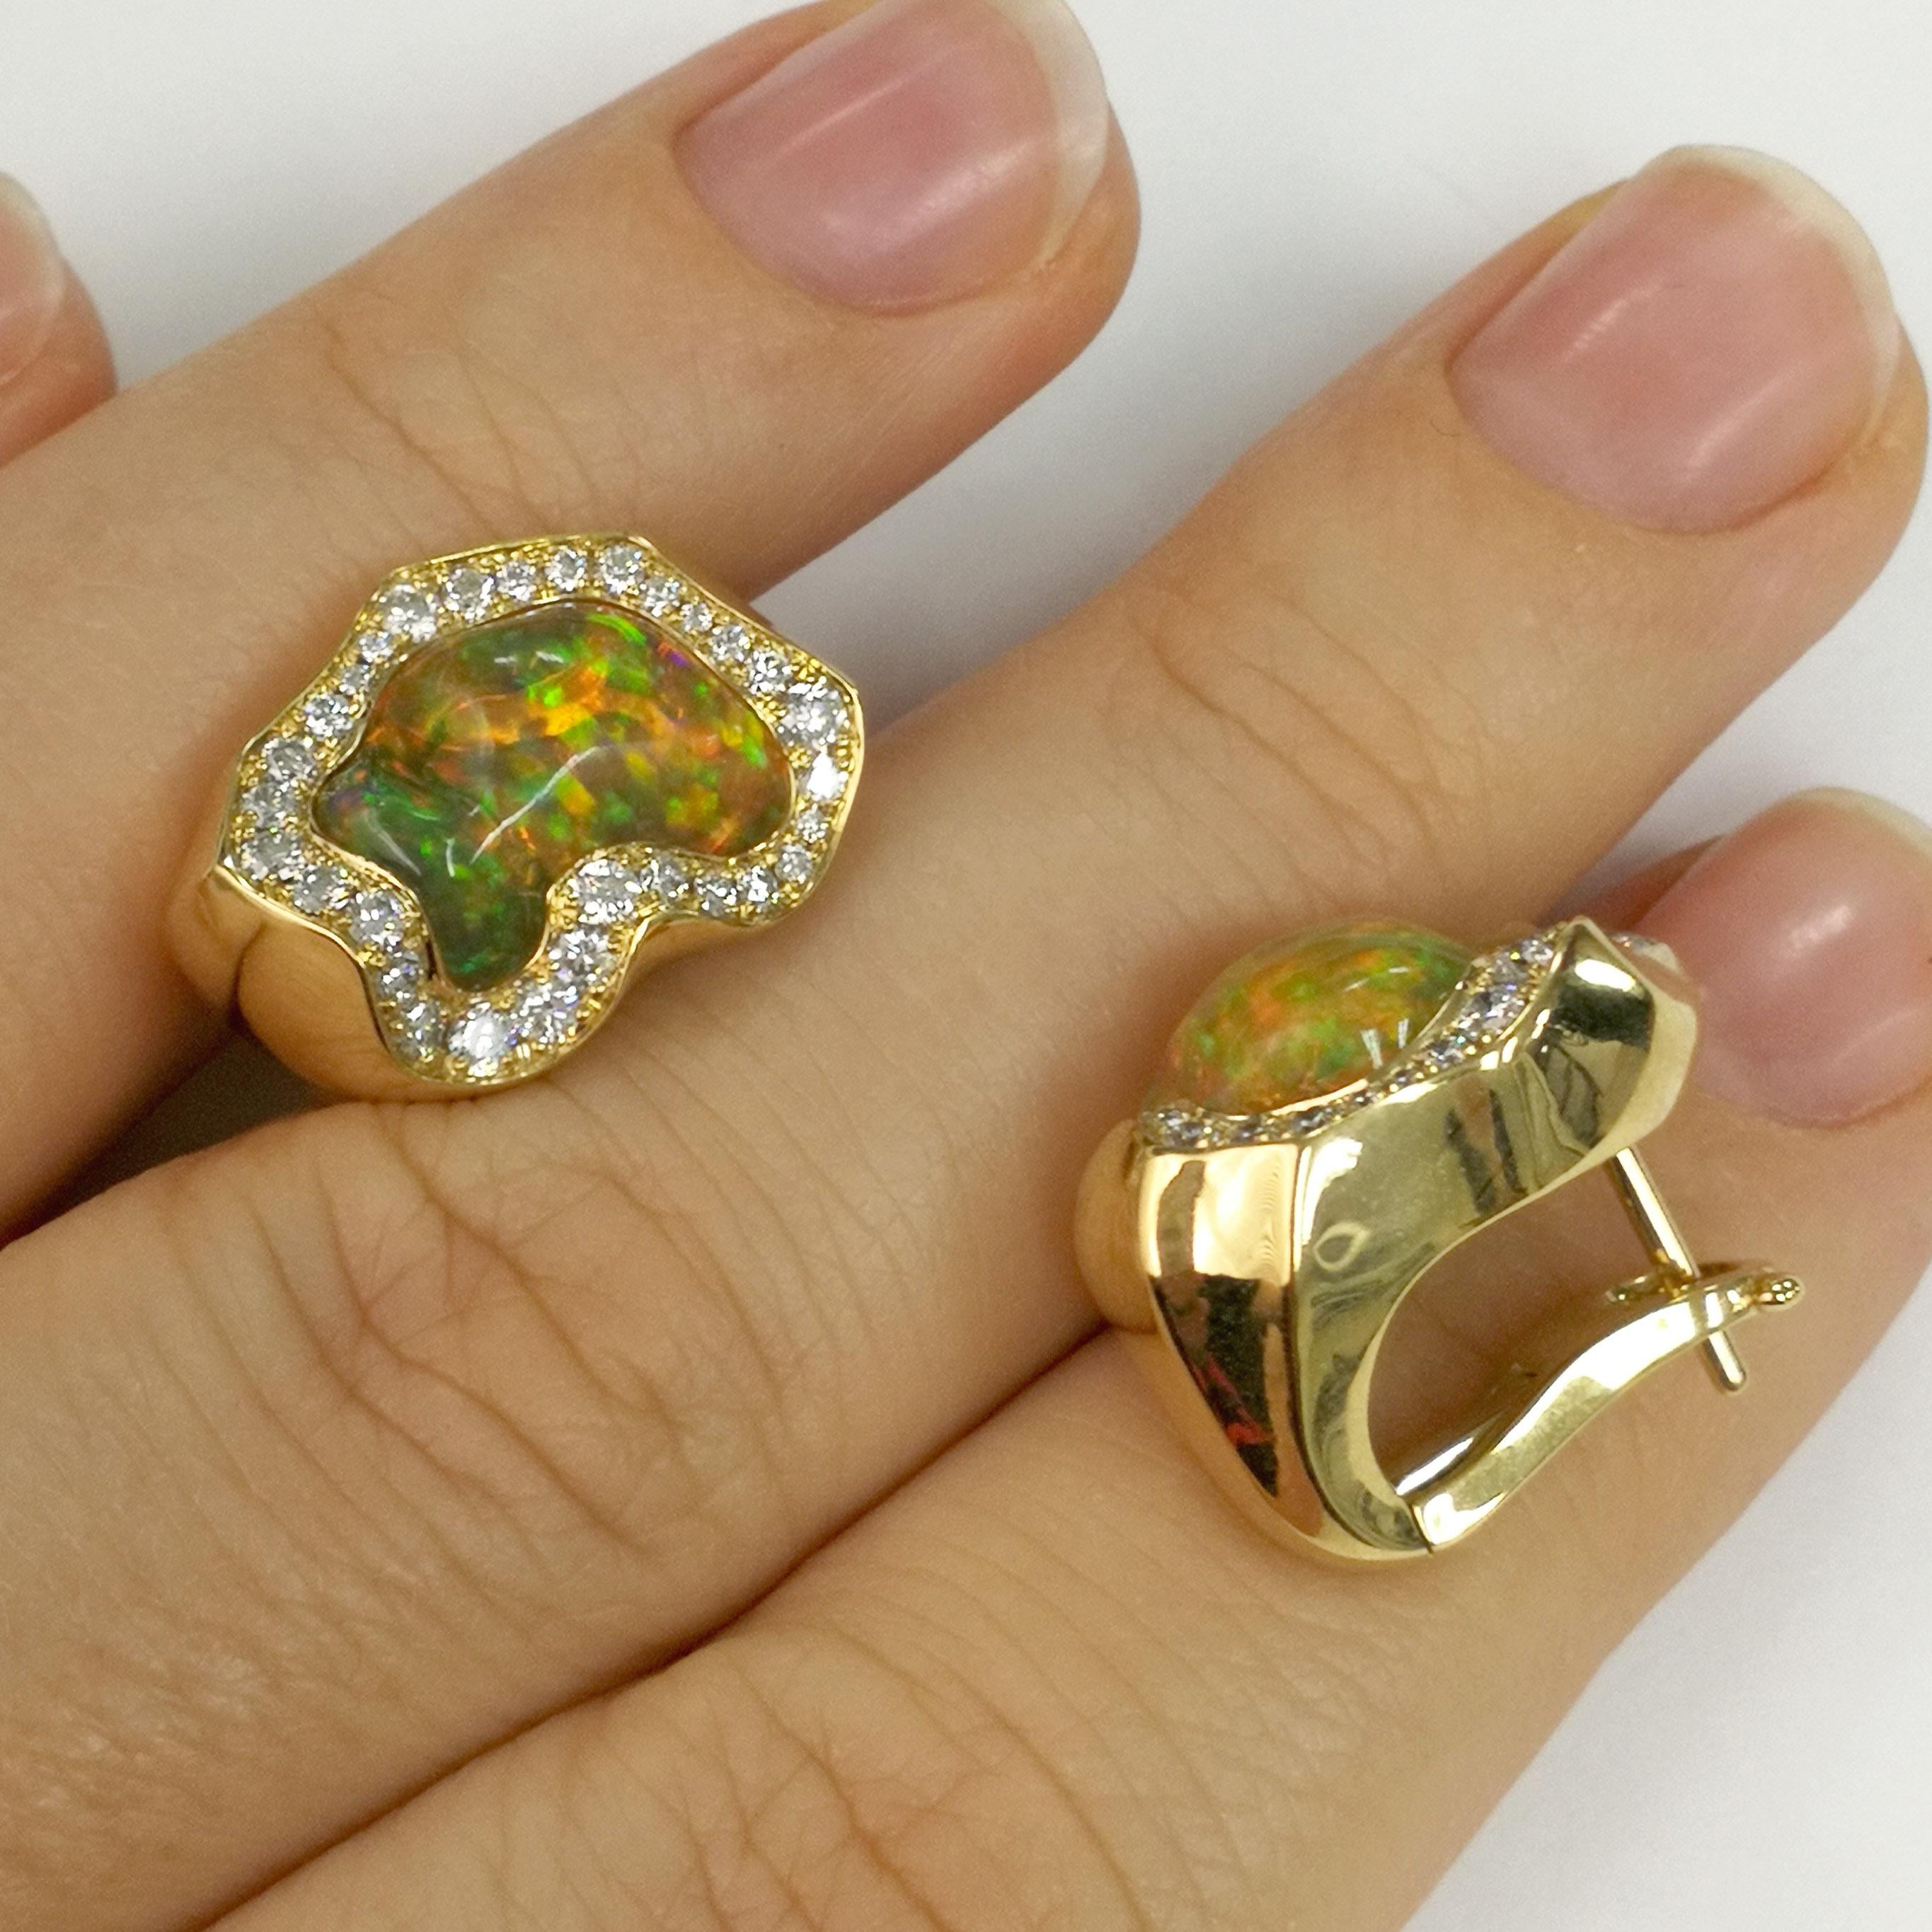 Sugarloaf Cabochon Mexican Opal 6.46 Carat Diamonds One of a Kind 18 Karat Yellow Gold Earrings